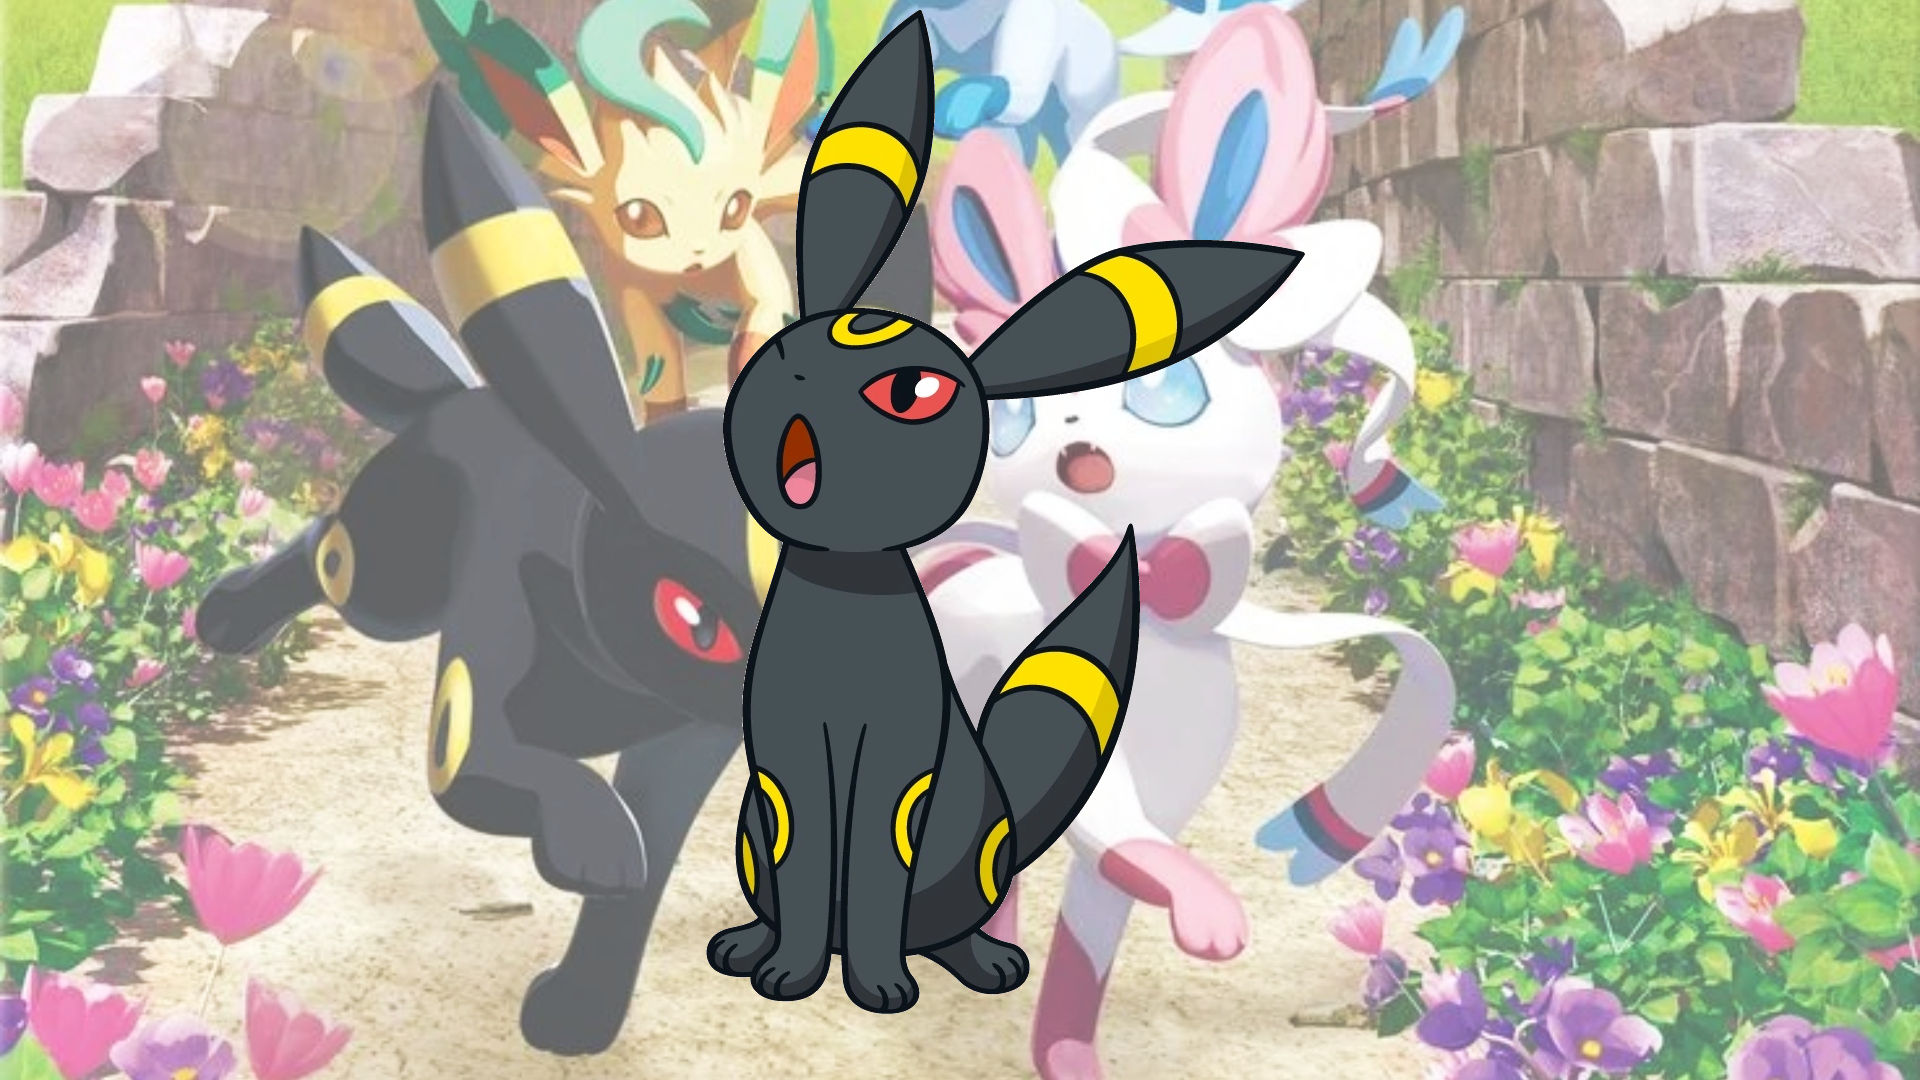 To be the very best, you need an Umbreon